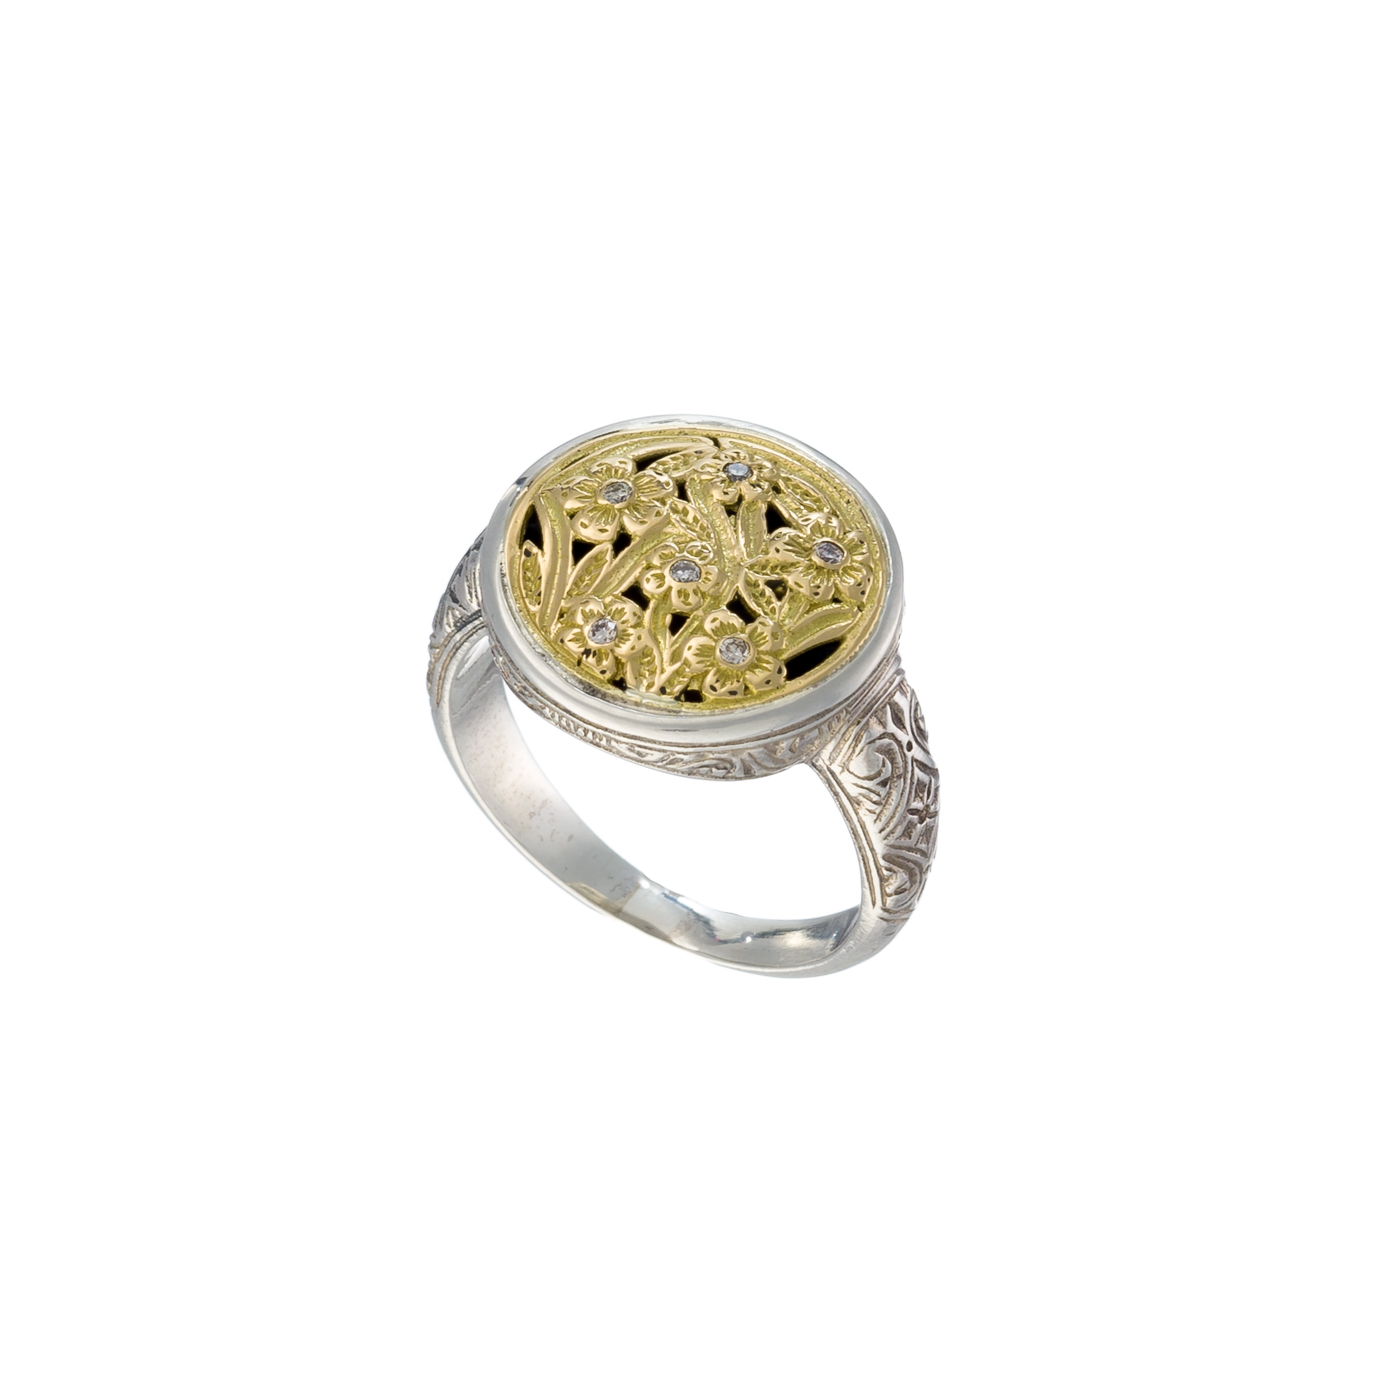 Harmony Round Ring in 18K Gold and Sterling Silver with Brown Diamonds